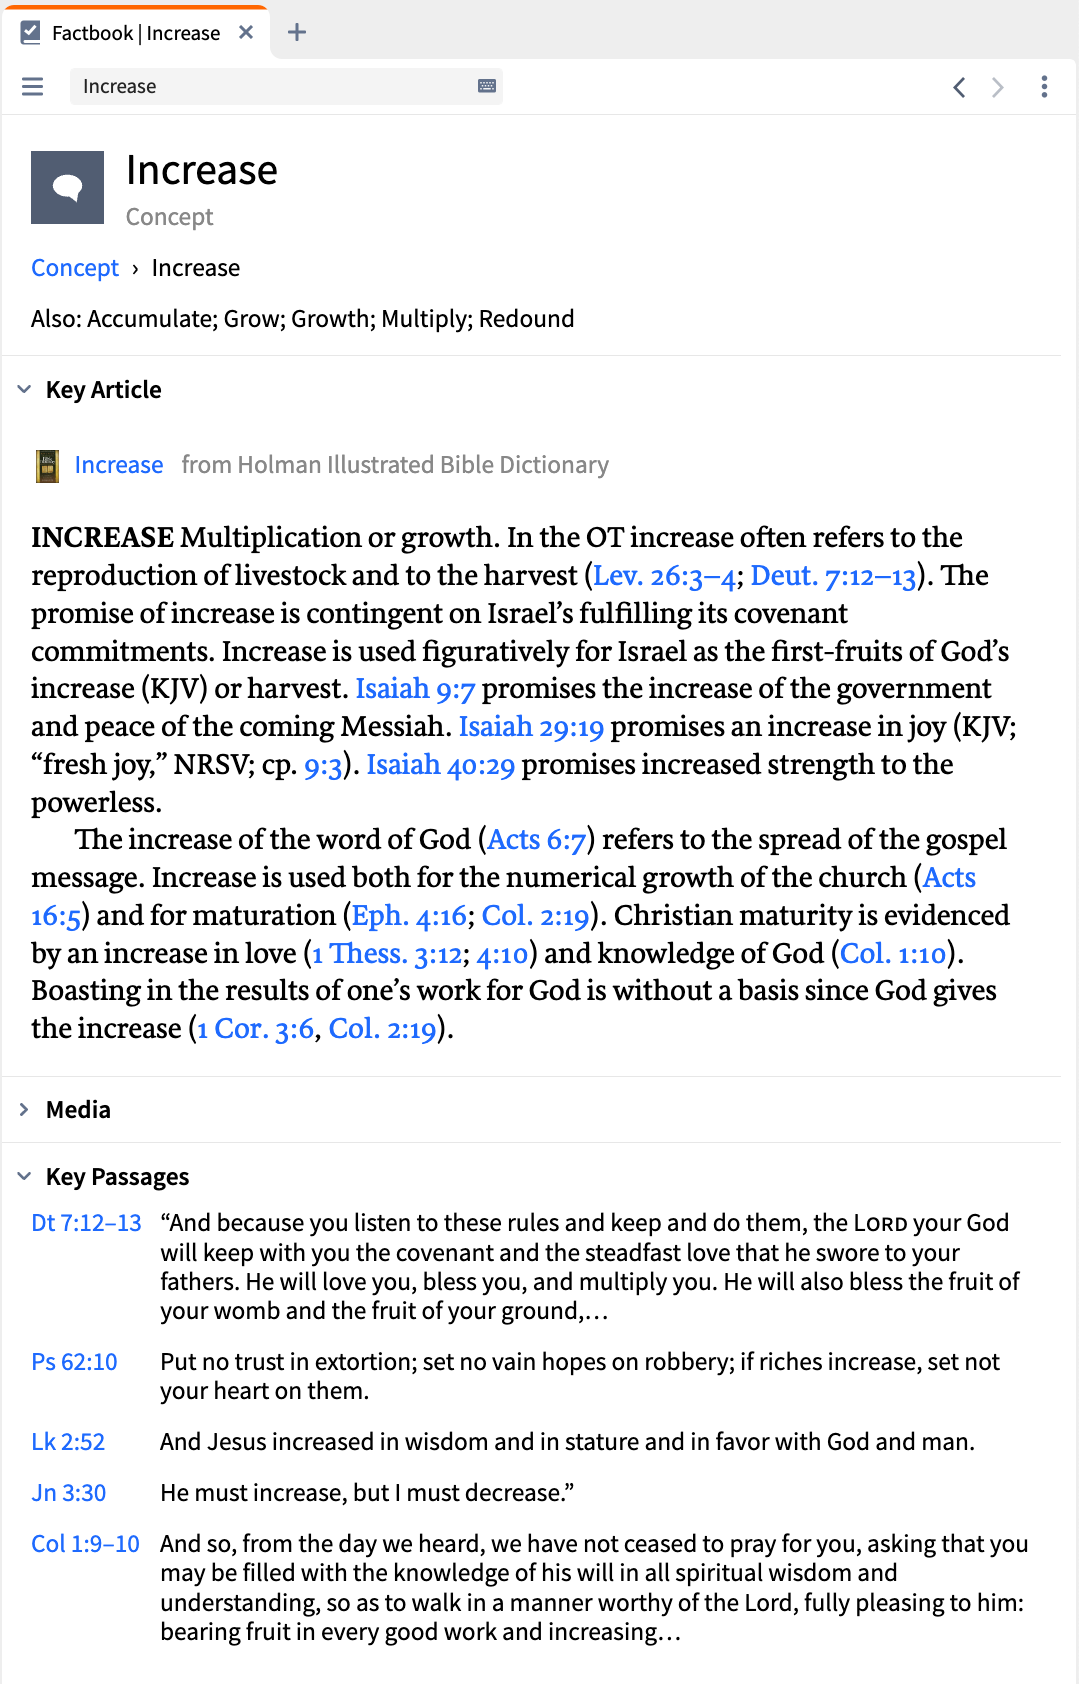 An image of Logos Bible study app's Factbook open to a study on the concept of Increase in Scripture.